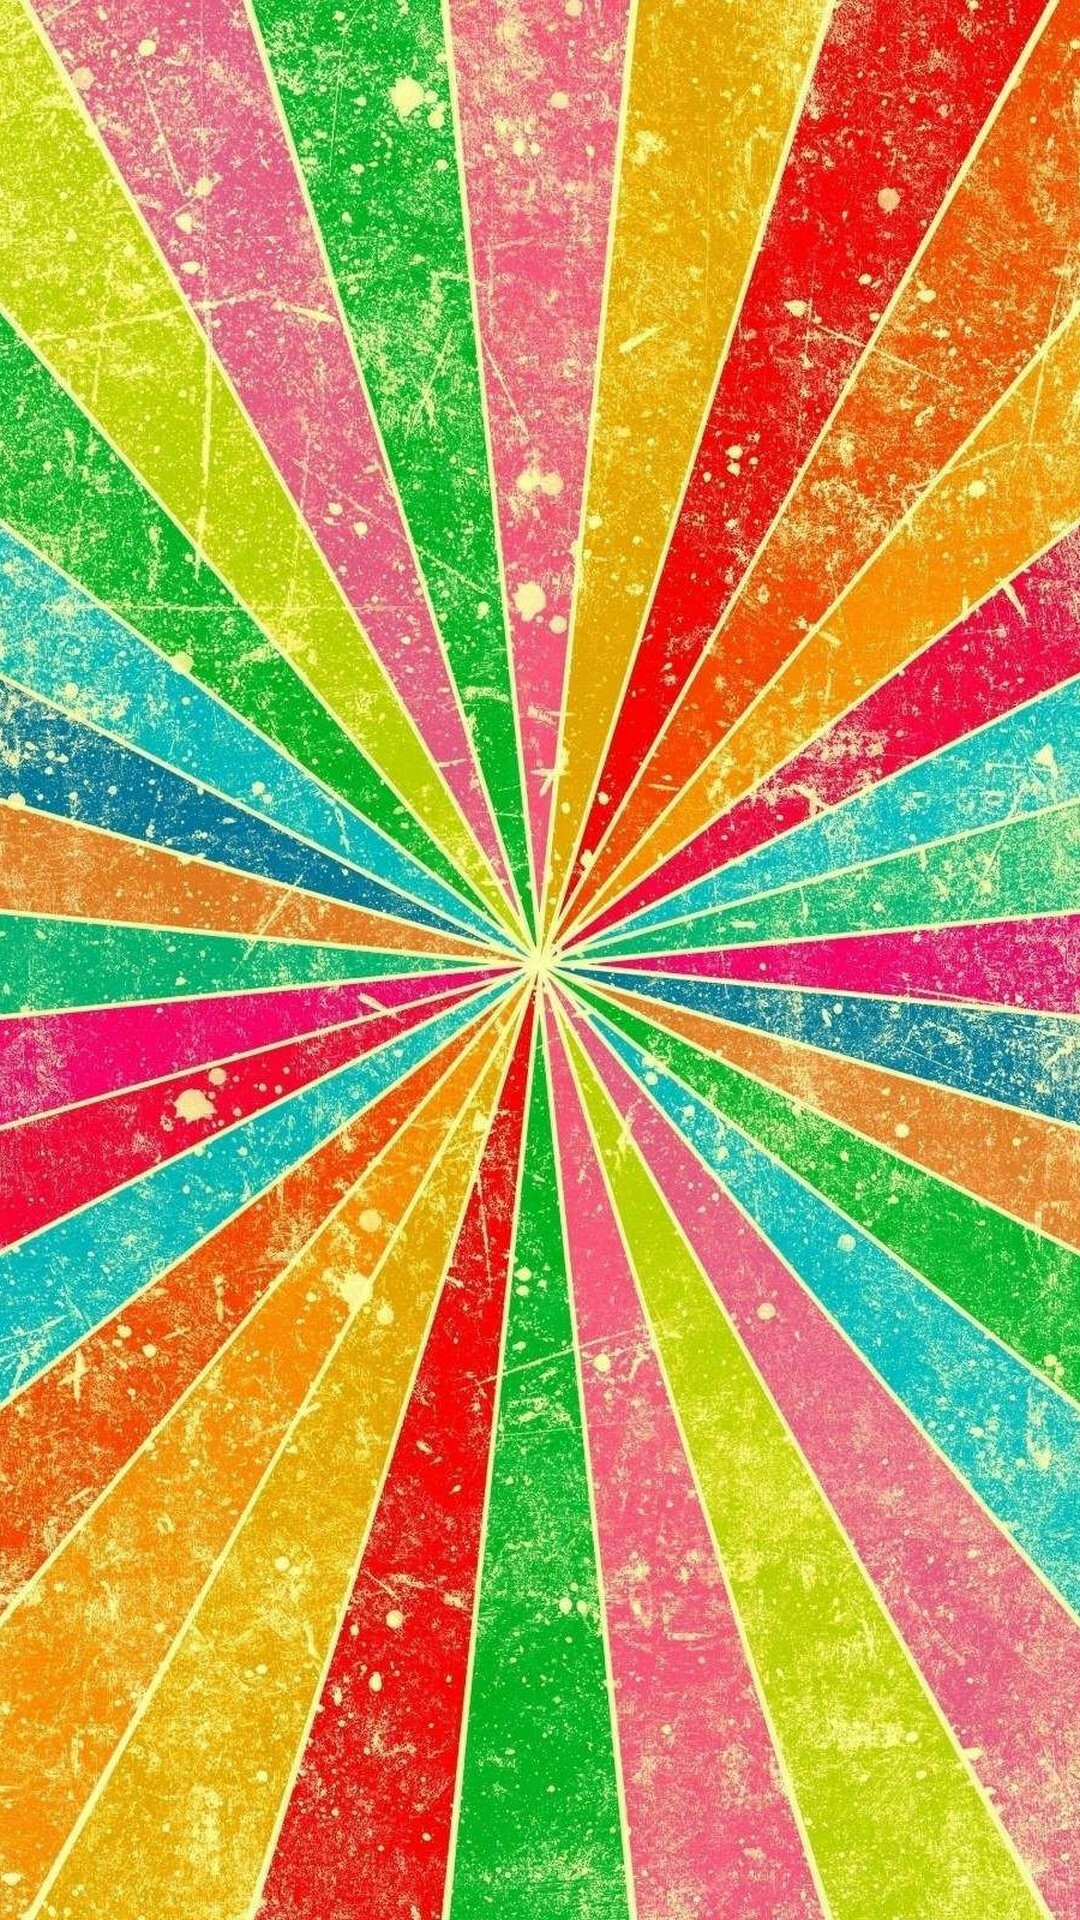 Rainbow Colors: Ornament, Creative arts, Painting, Different shades. 1080x1920 Full HD Wallpaper.